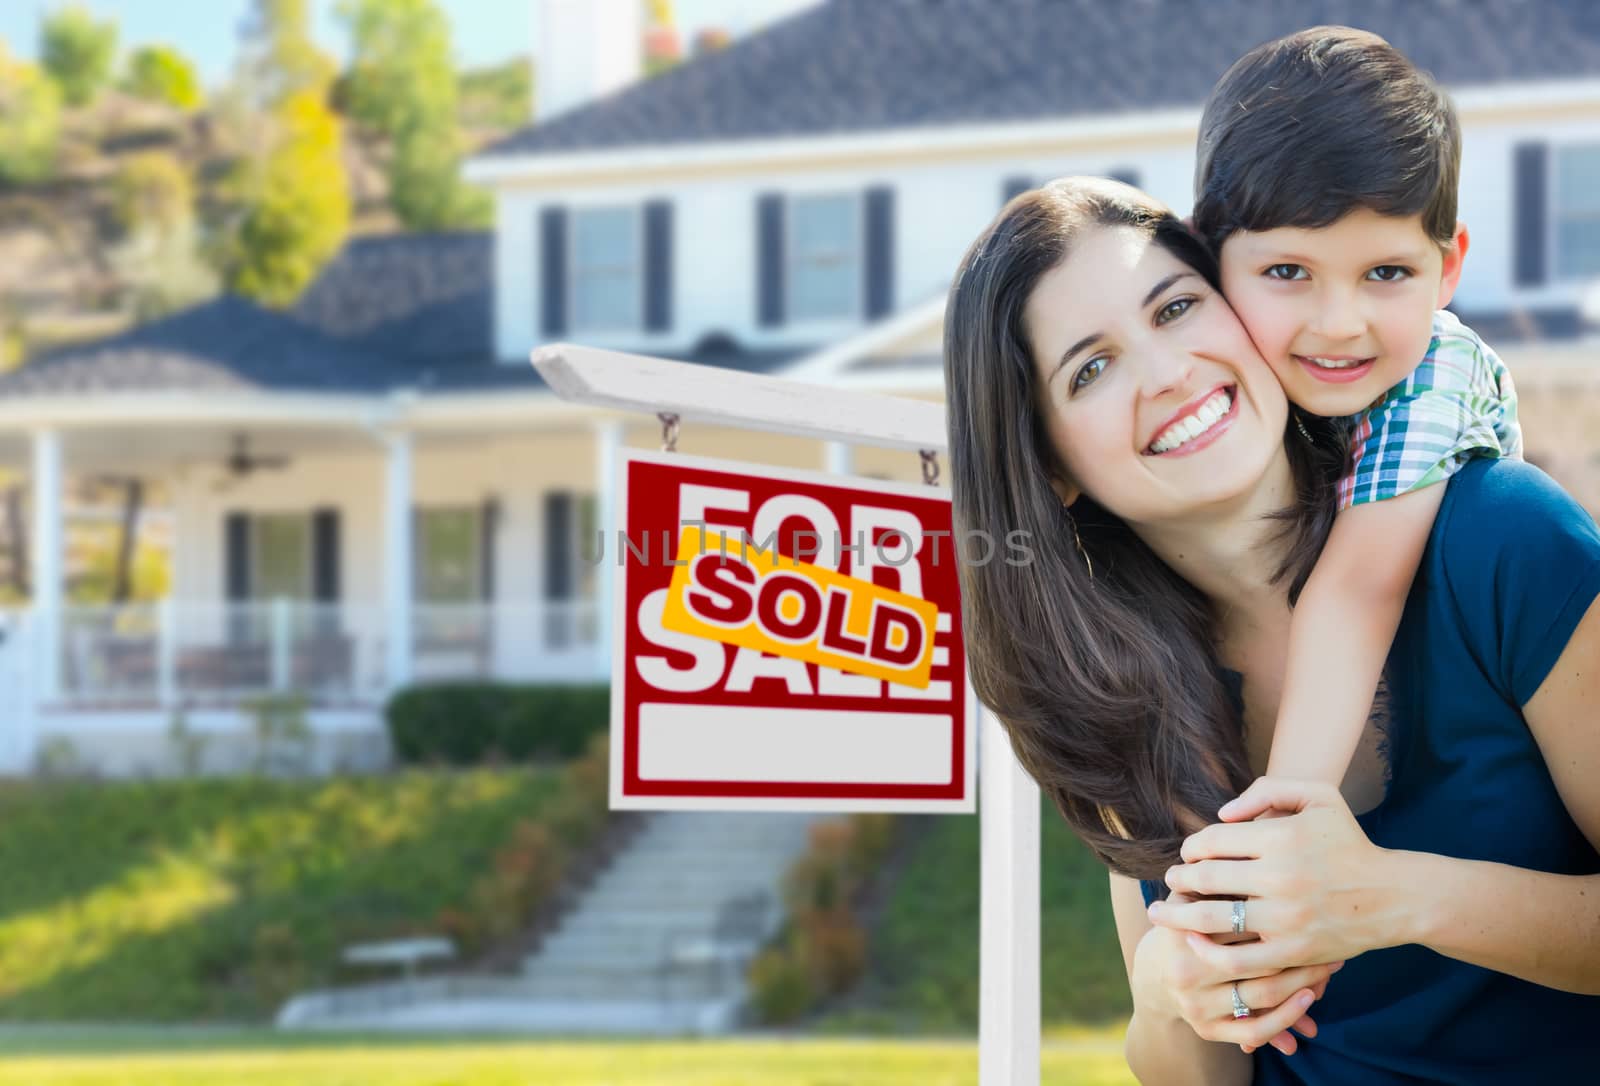 Young Mother and Son In Front of Sold For Sale Real Estate Sign and House. by Feverpitched